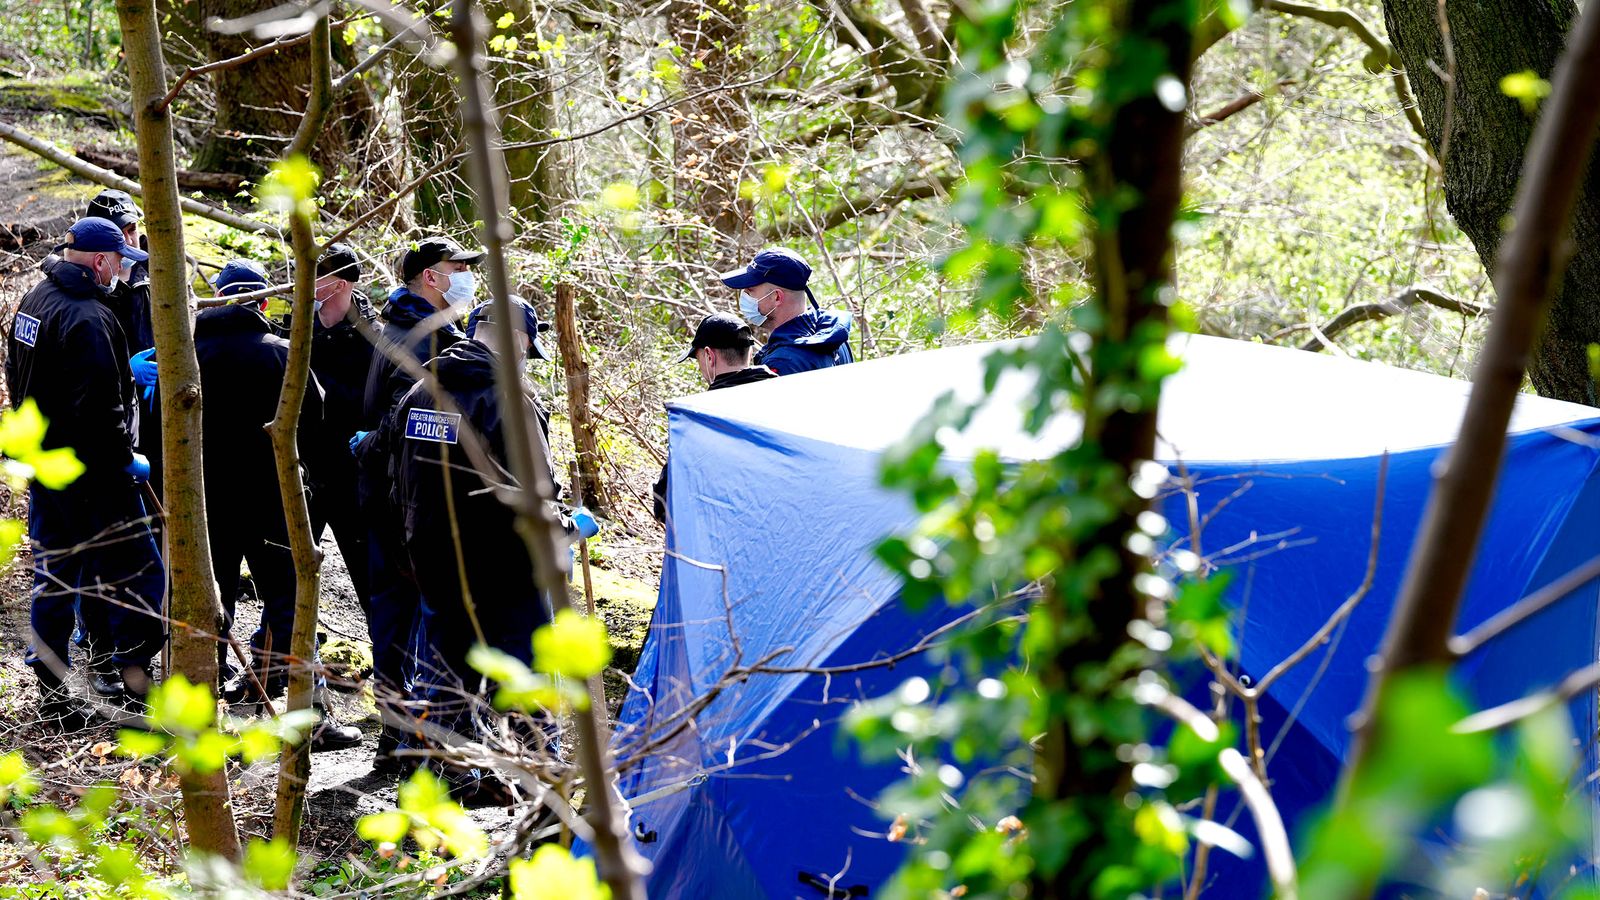 Two men charged with murder after man's torso found in Salford nature reserve